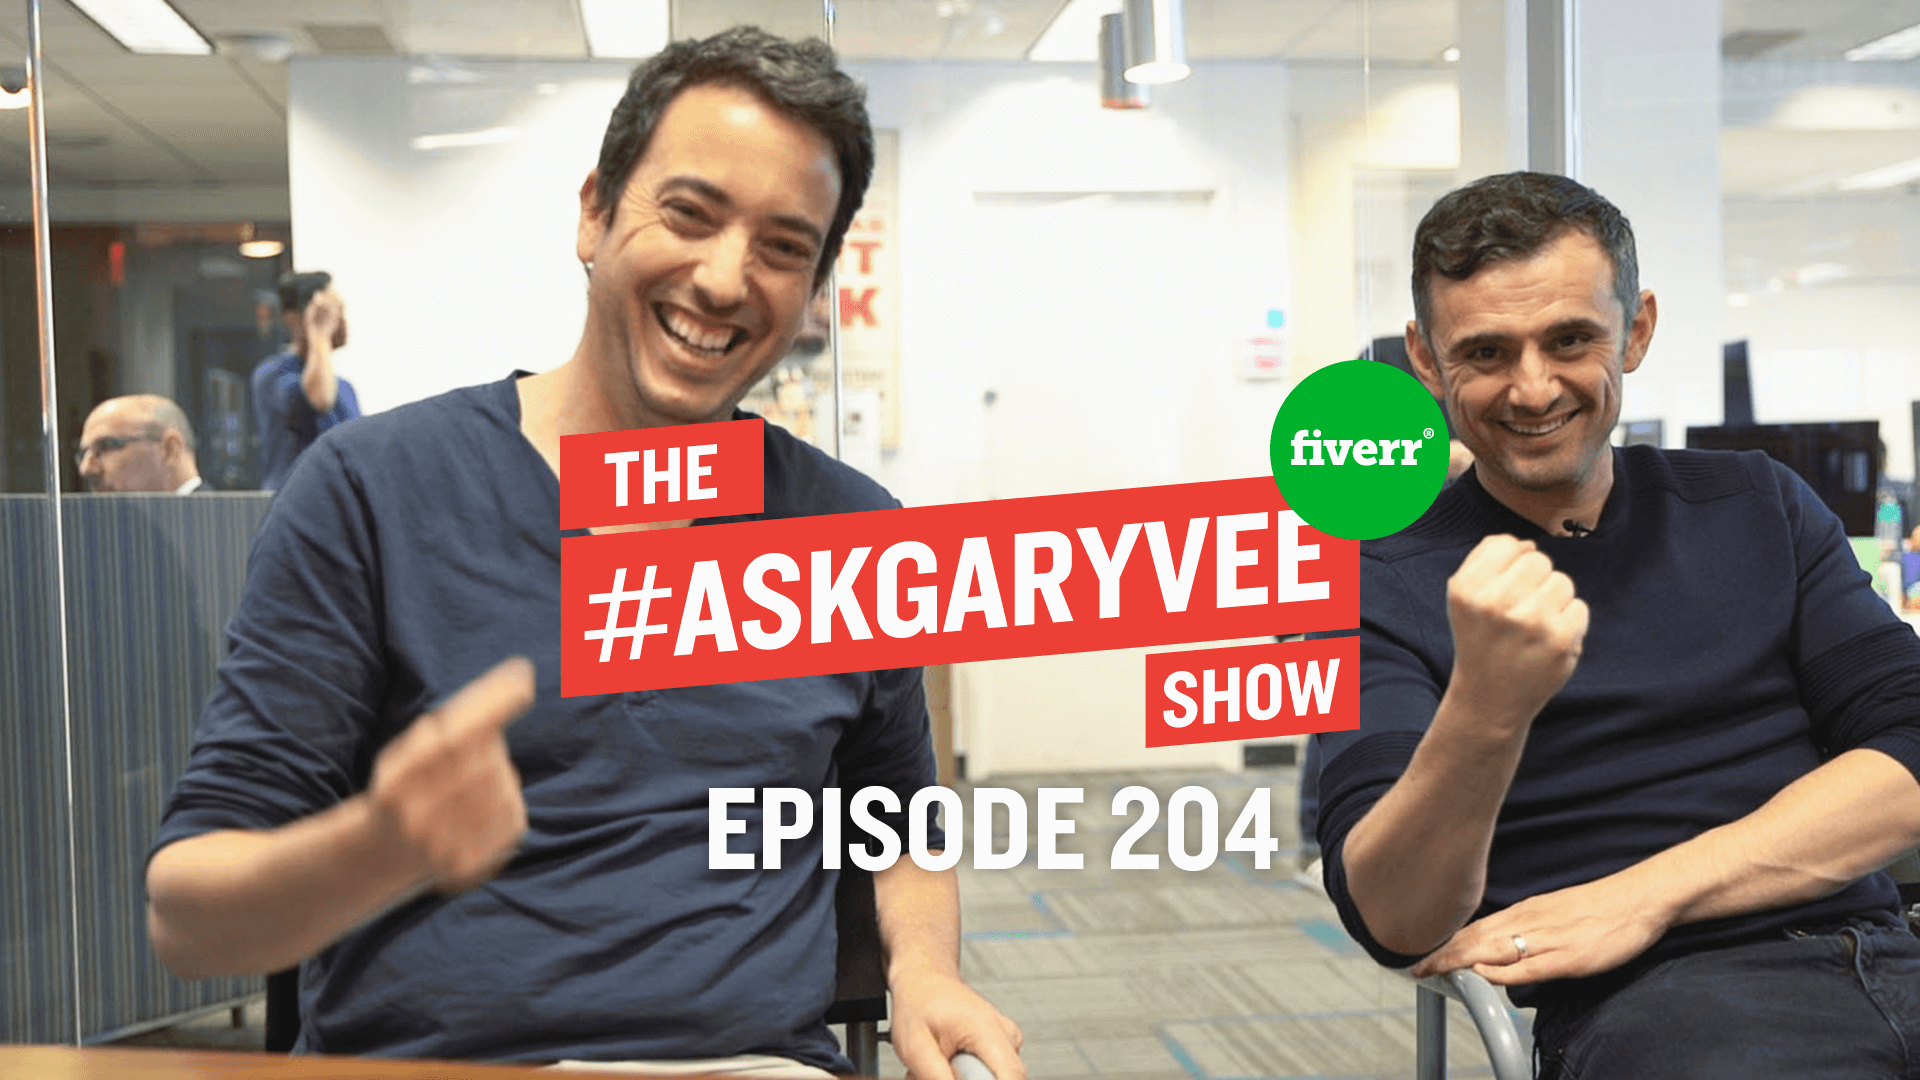 Fiverr joins Gary in Episode 204 of The #AskGaryVee Show!